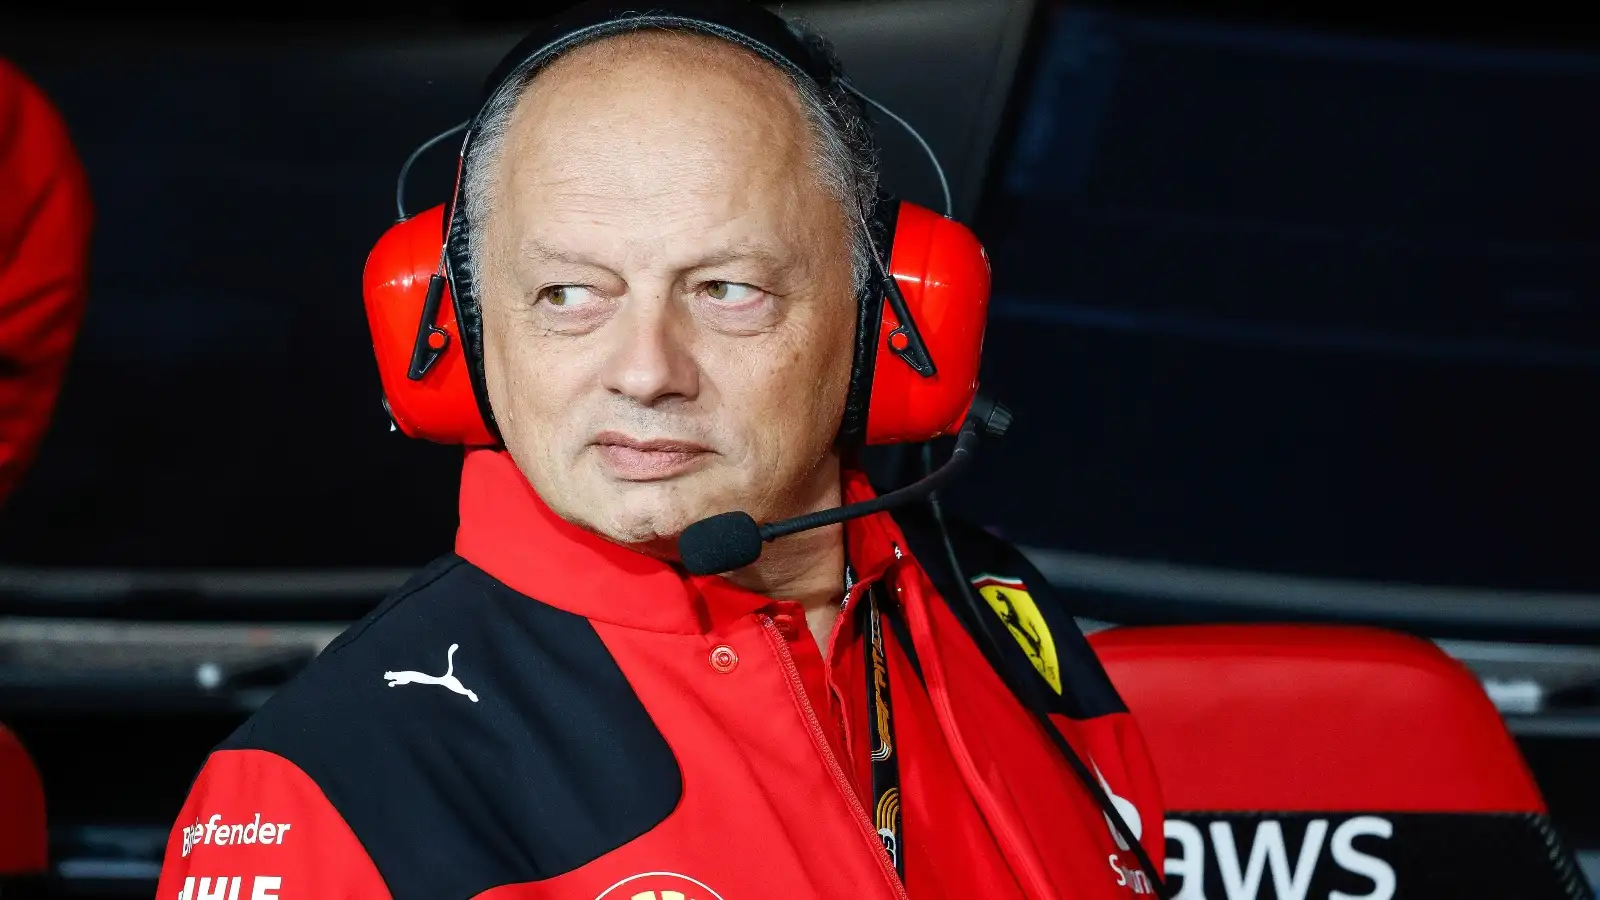 Fred Vasseur on the Las Vegas pit wall.